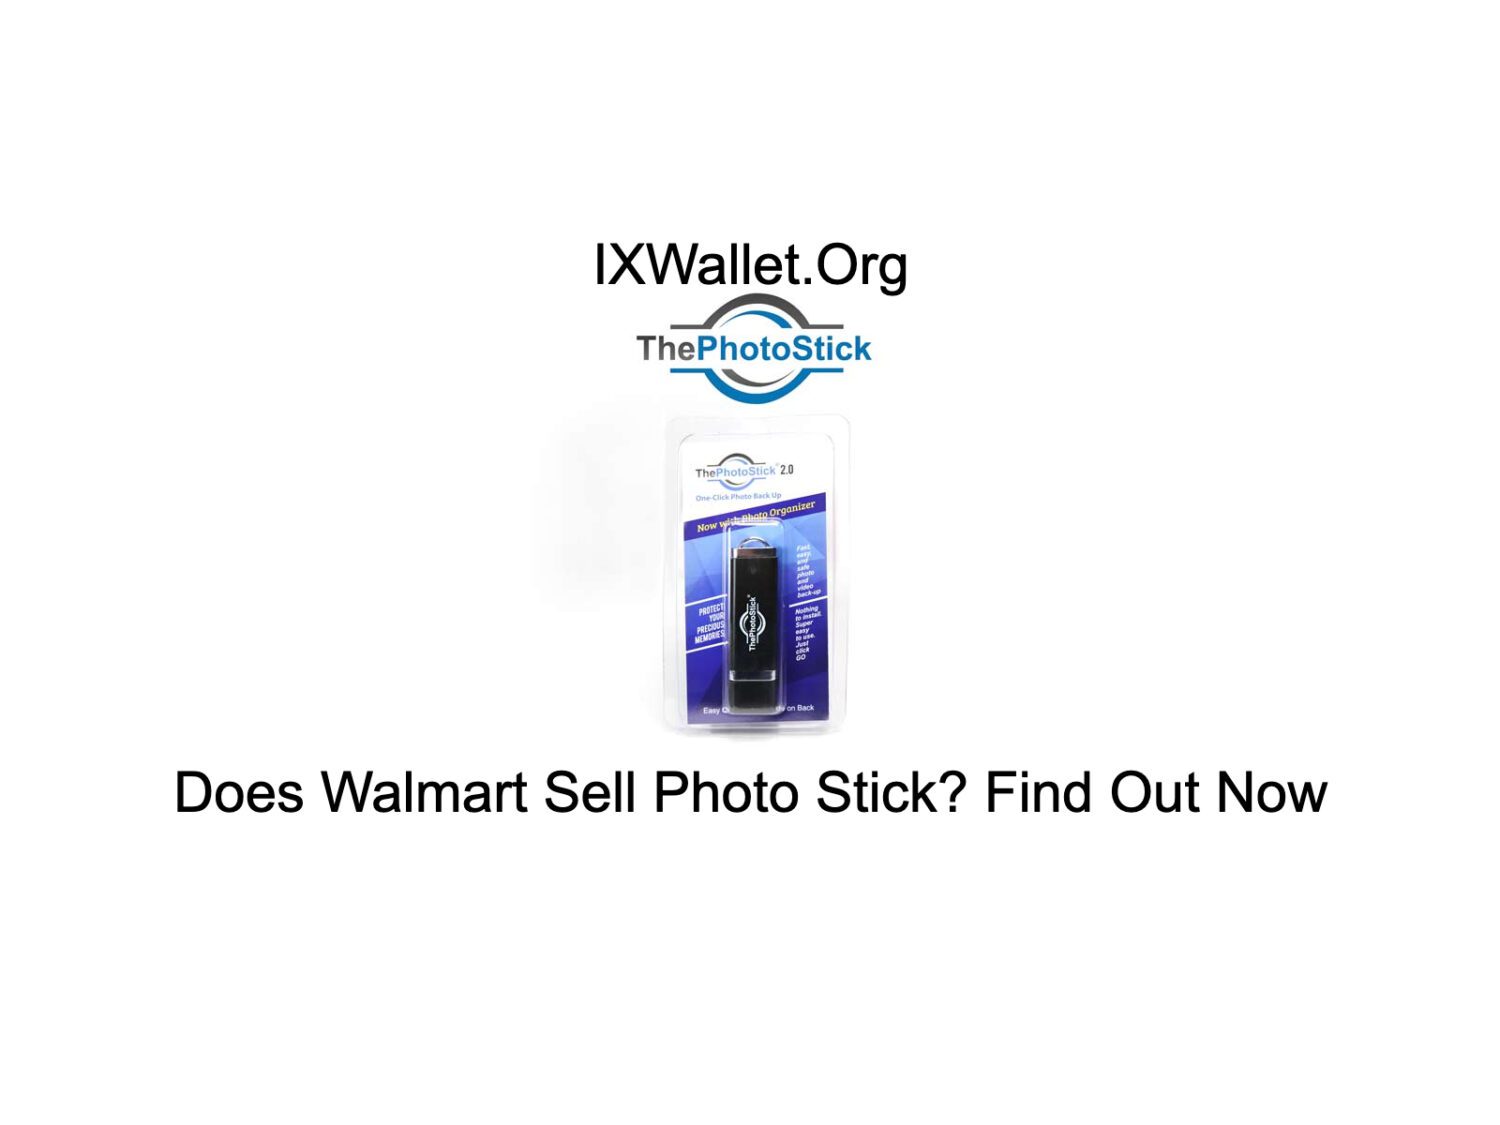 Does Walmart Sell Photo Stick?